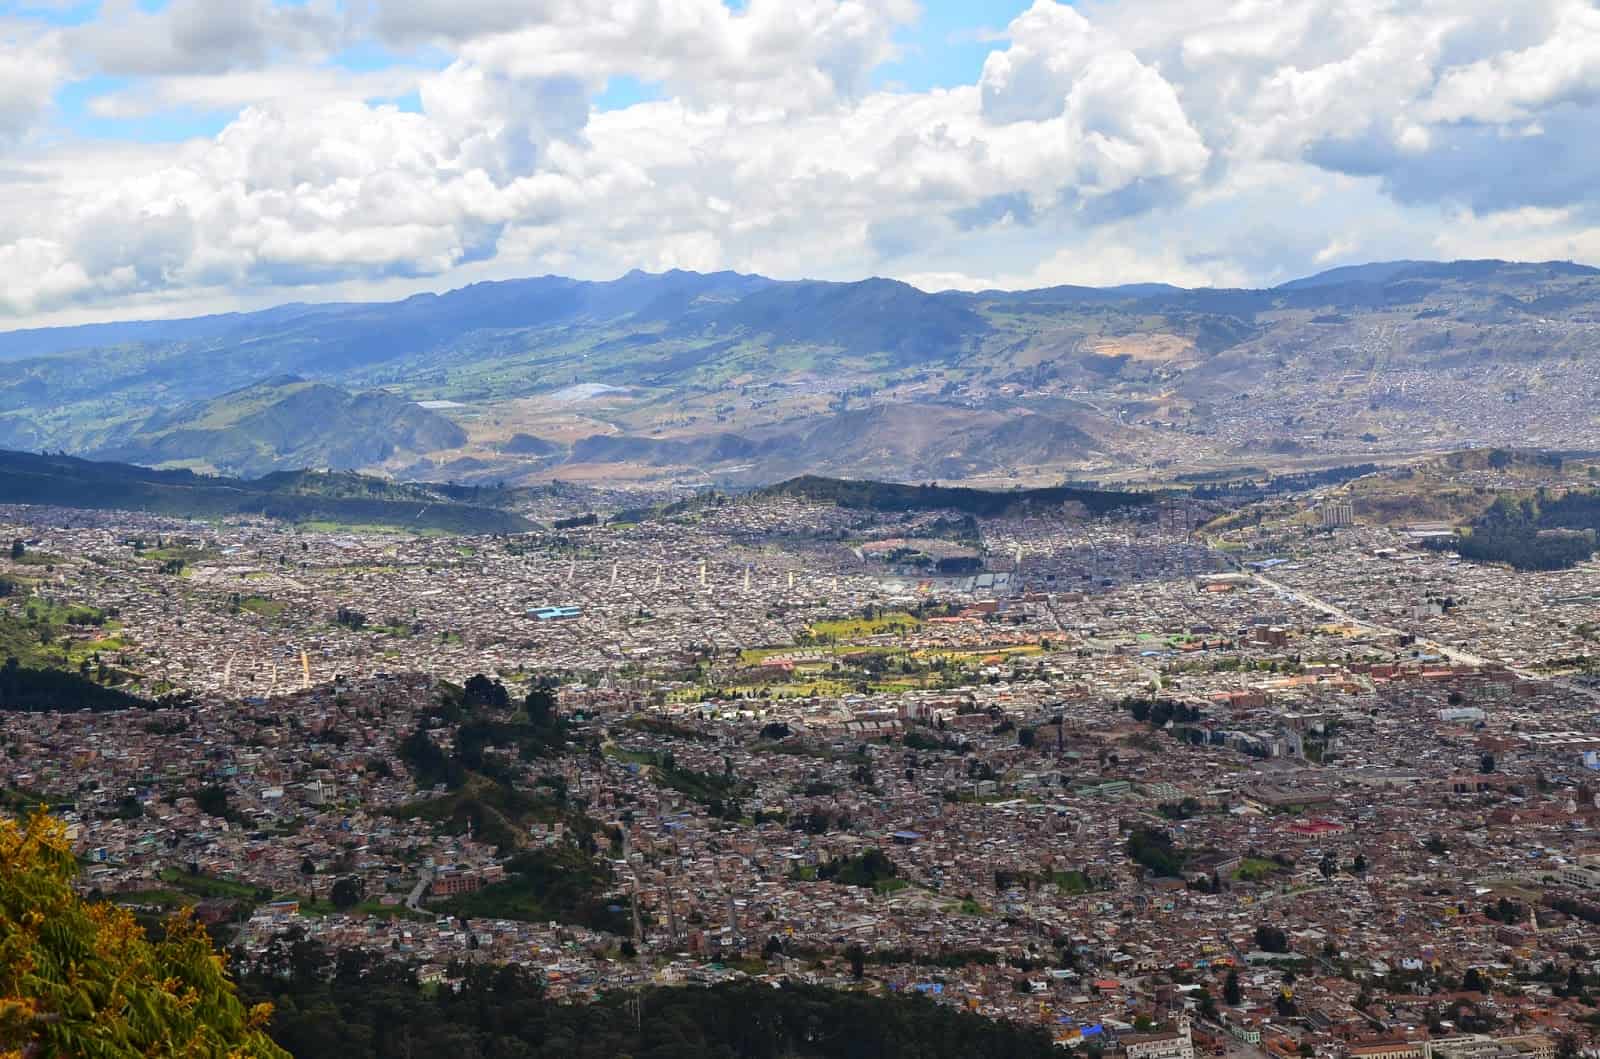 Looking towards the south of Bogotá from Monserrate